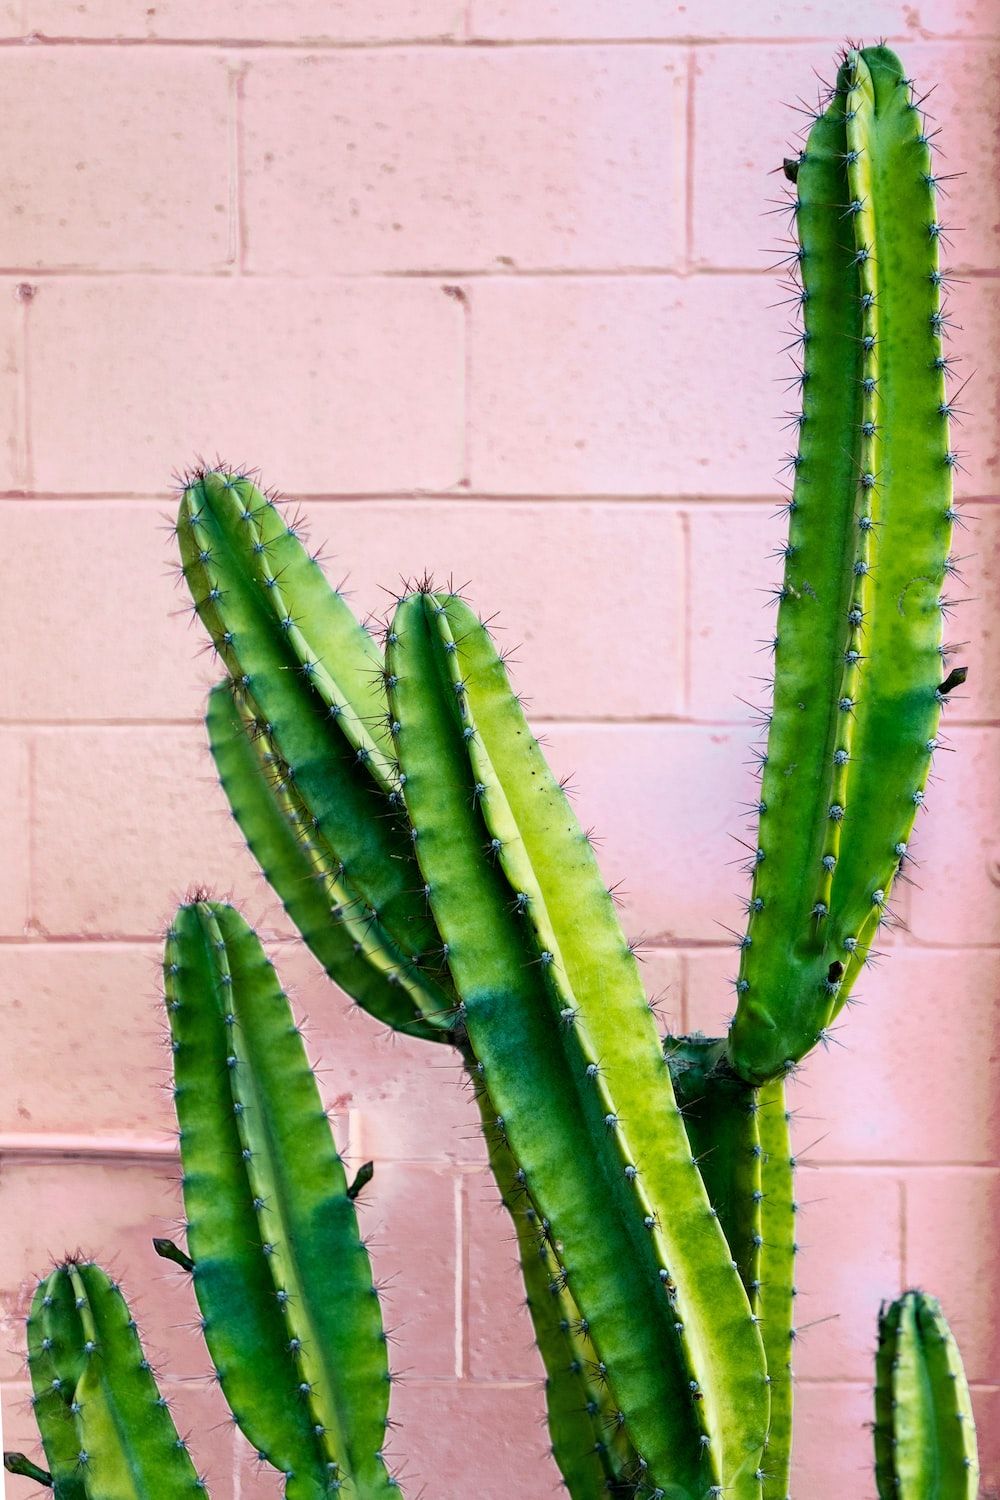 A cactus in front of a pink brick wall - Cactus